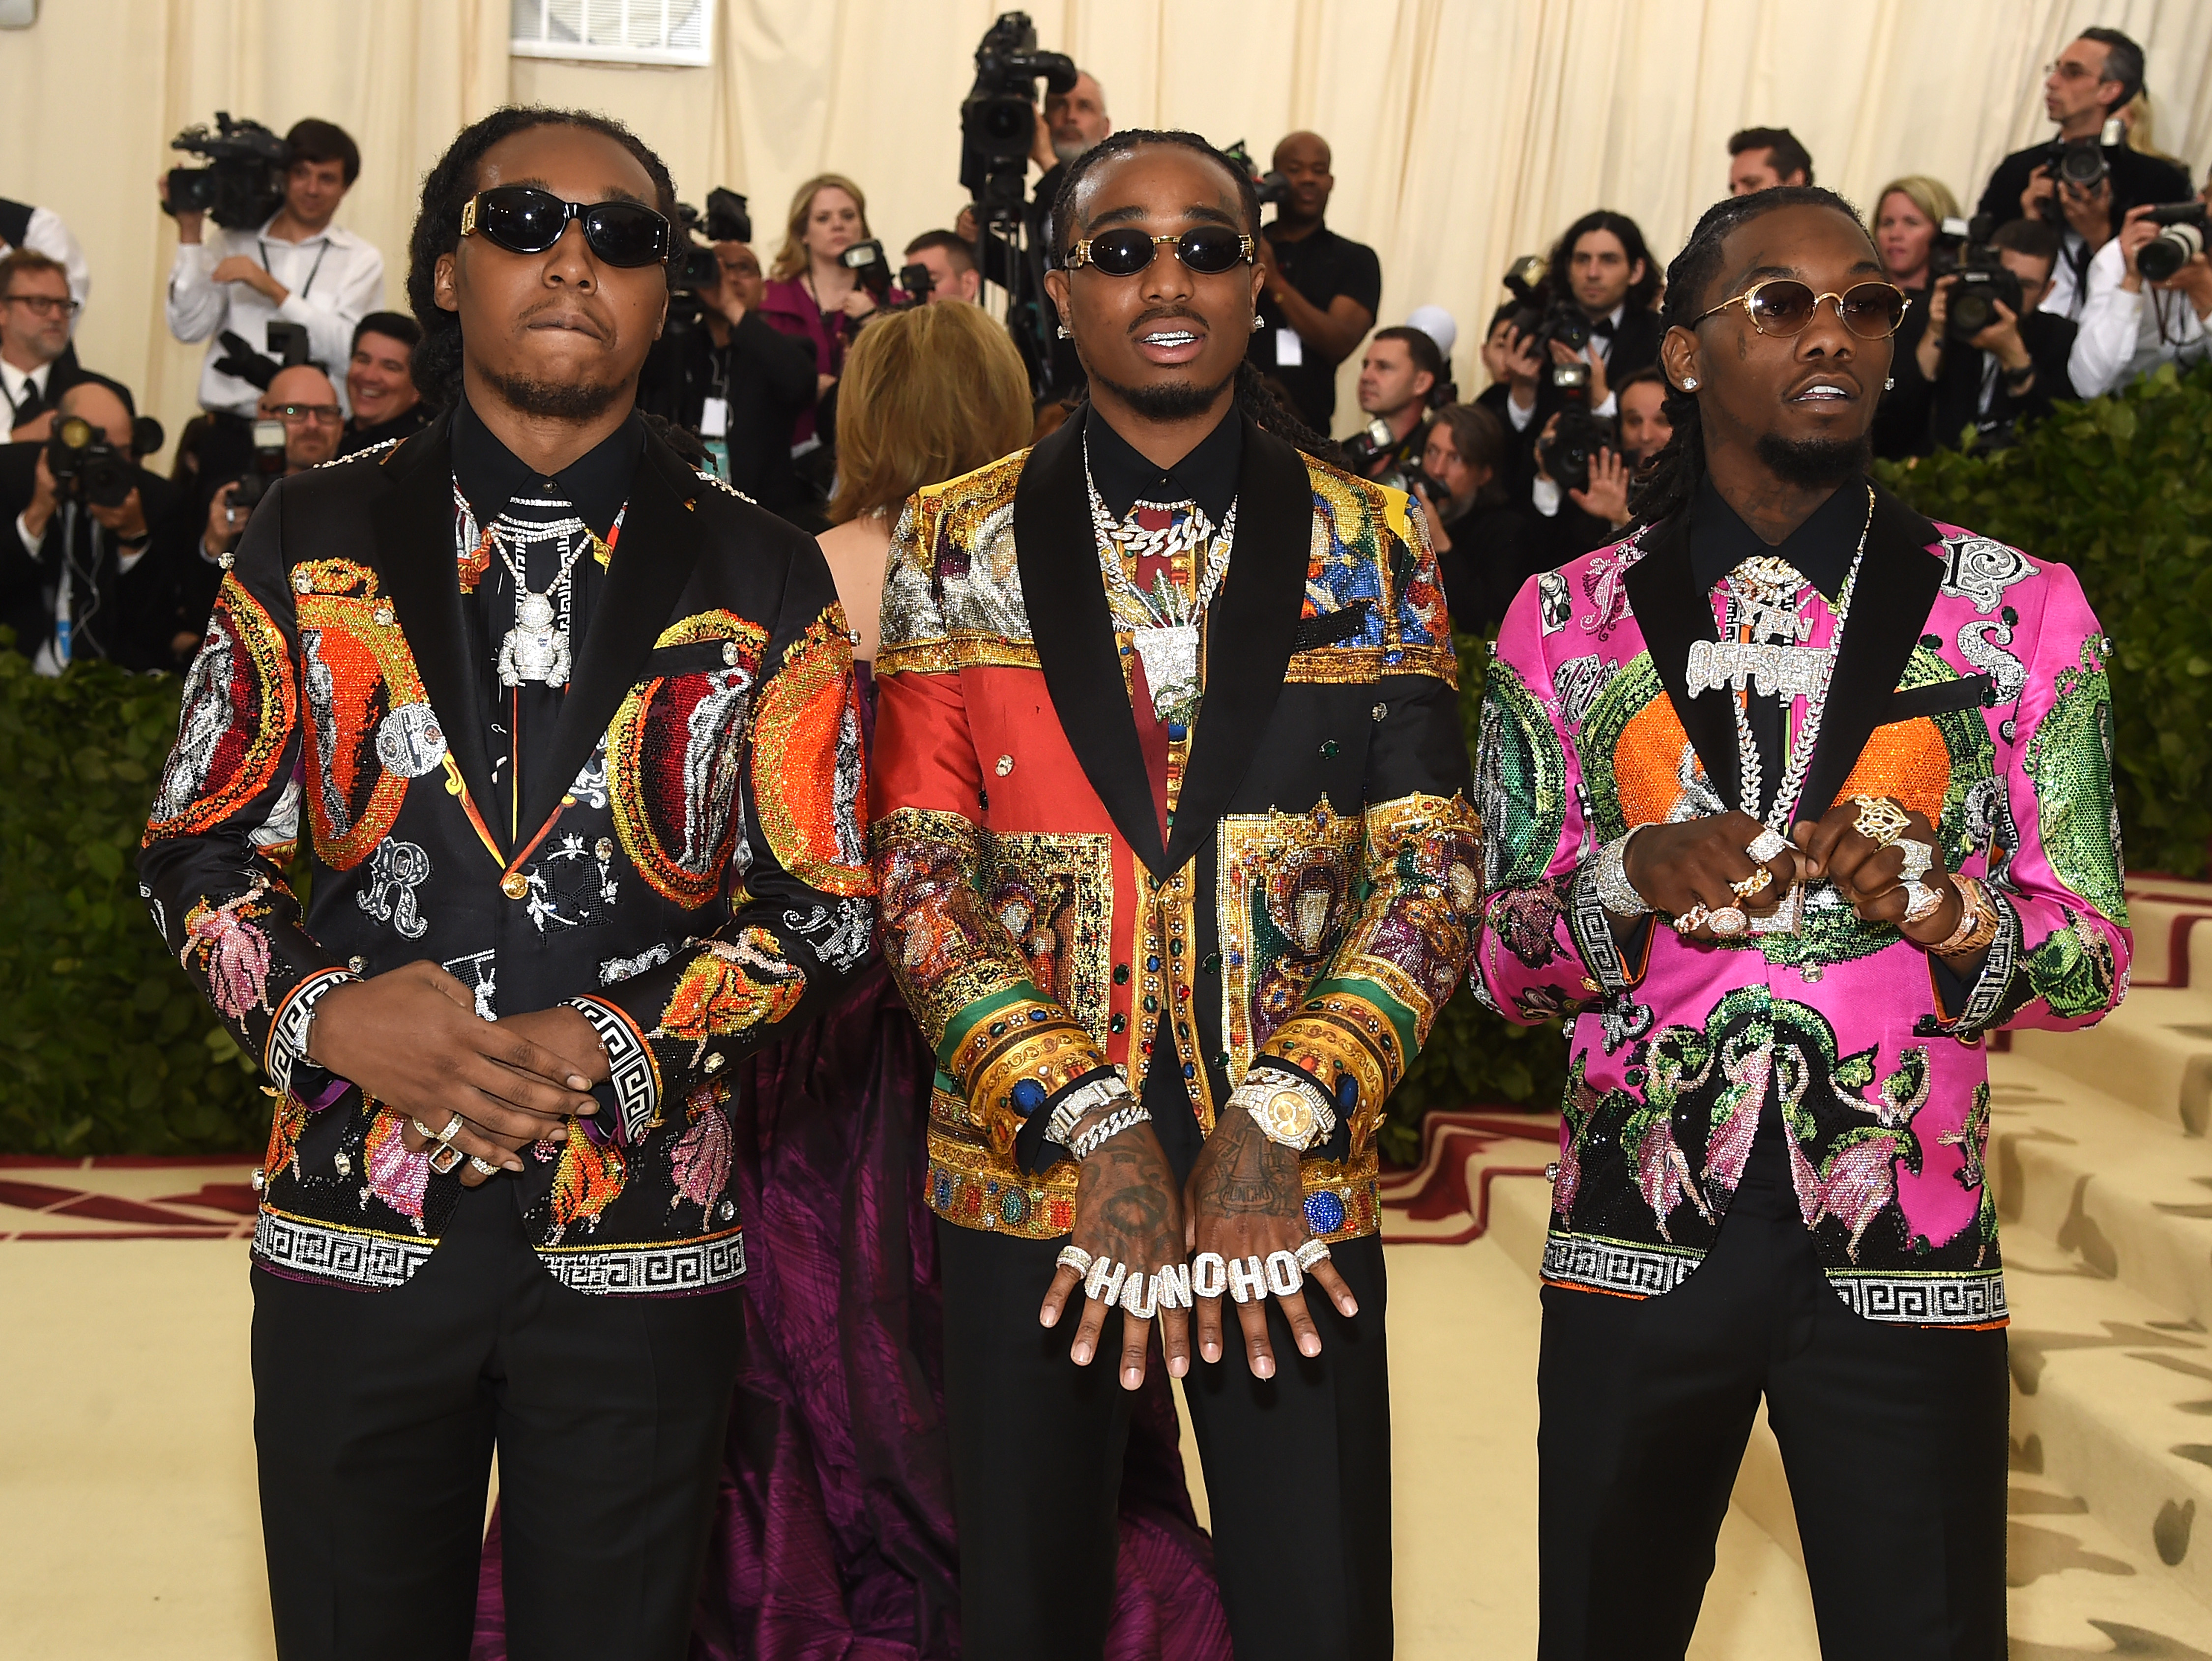 Migos' stylist breaks down their colorful, coordinated tour outfits